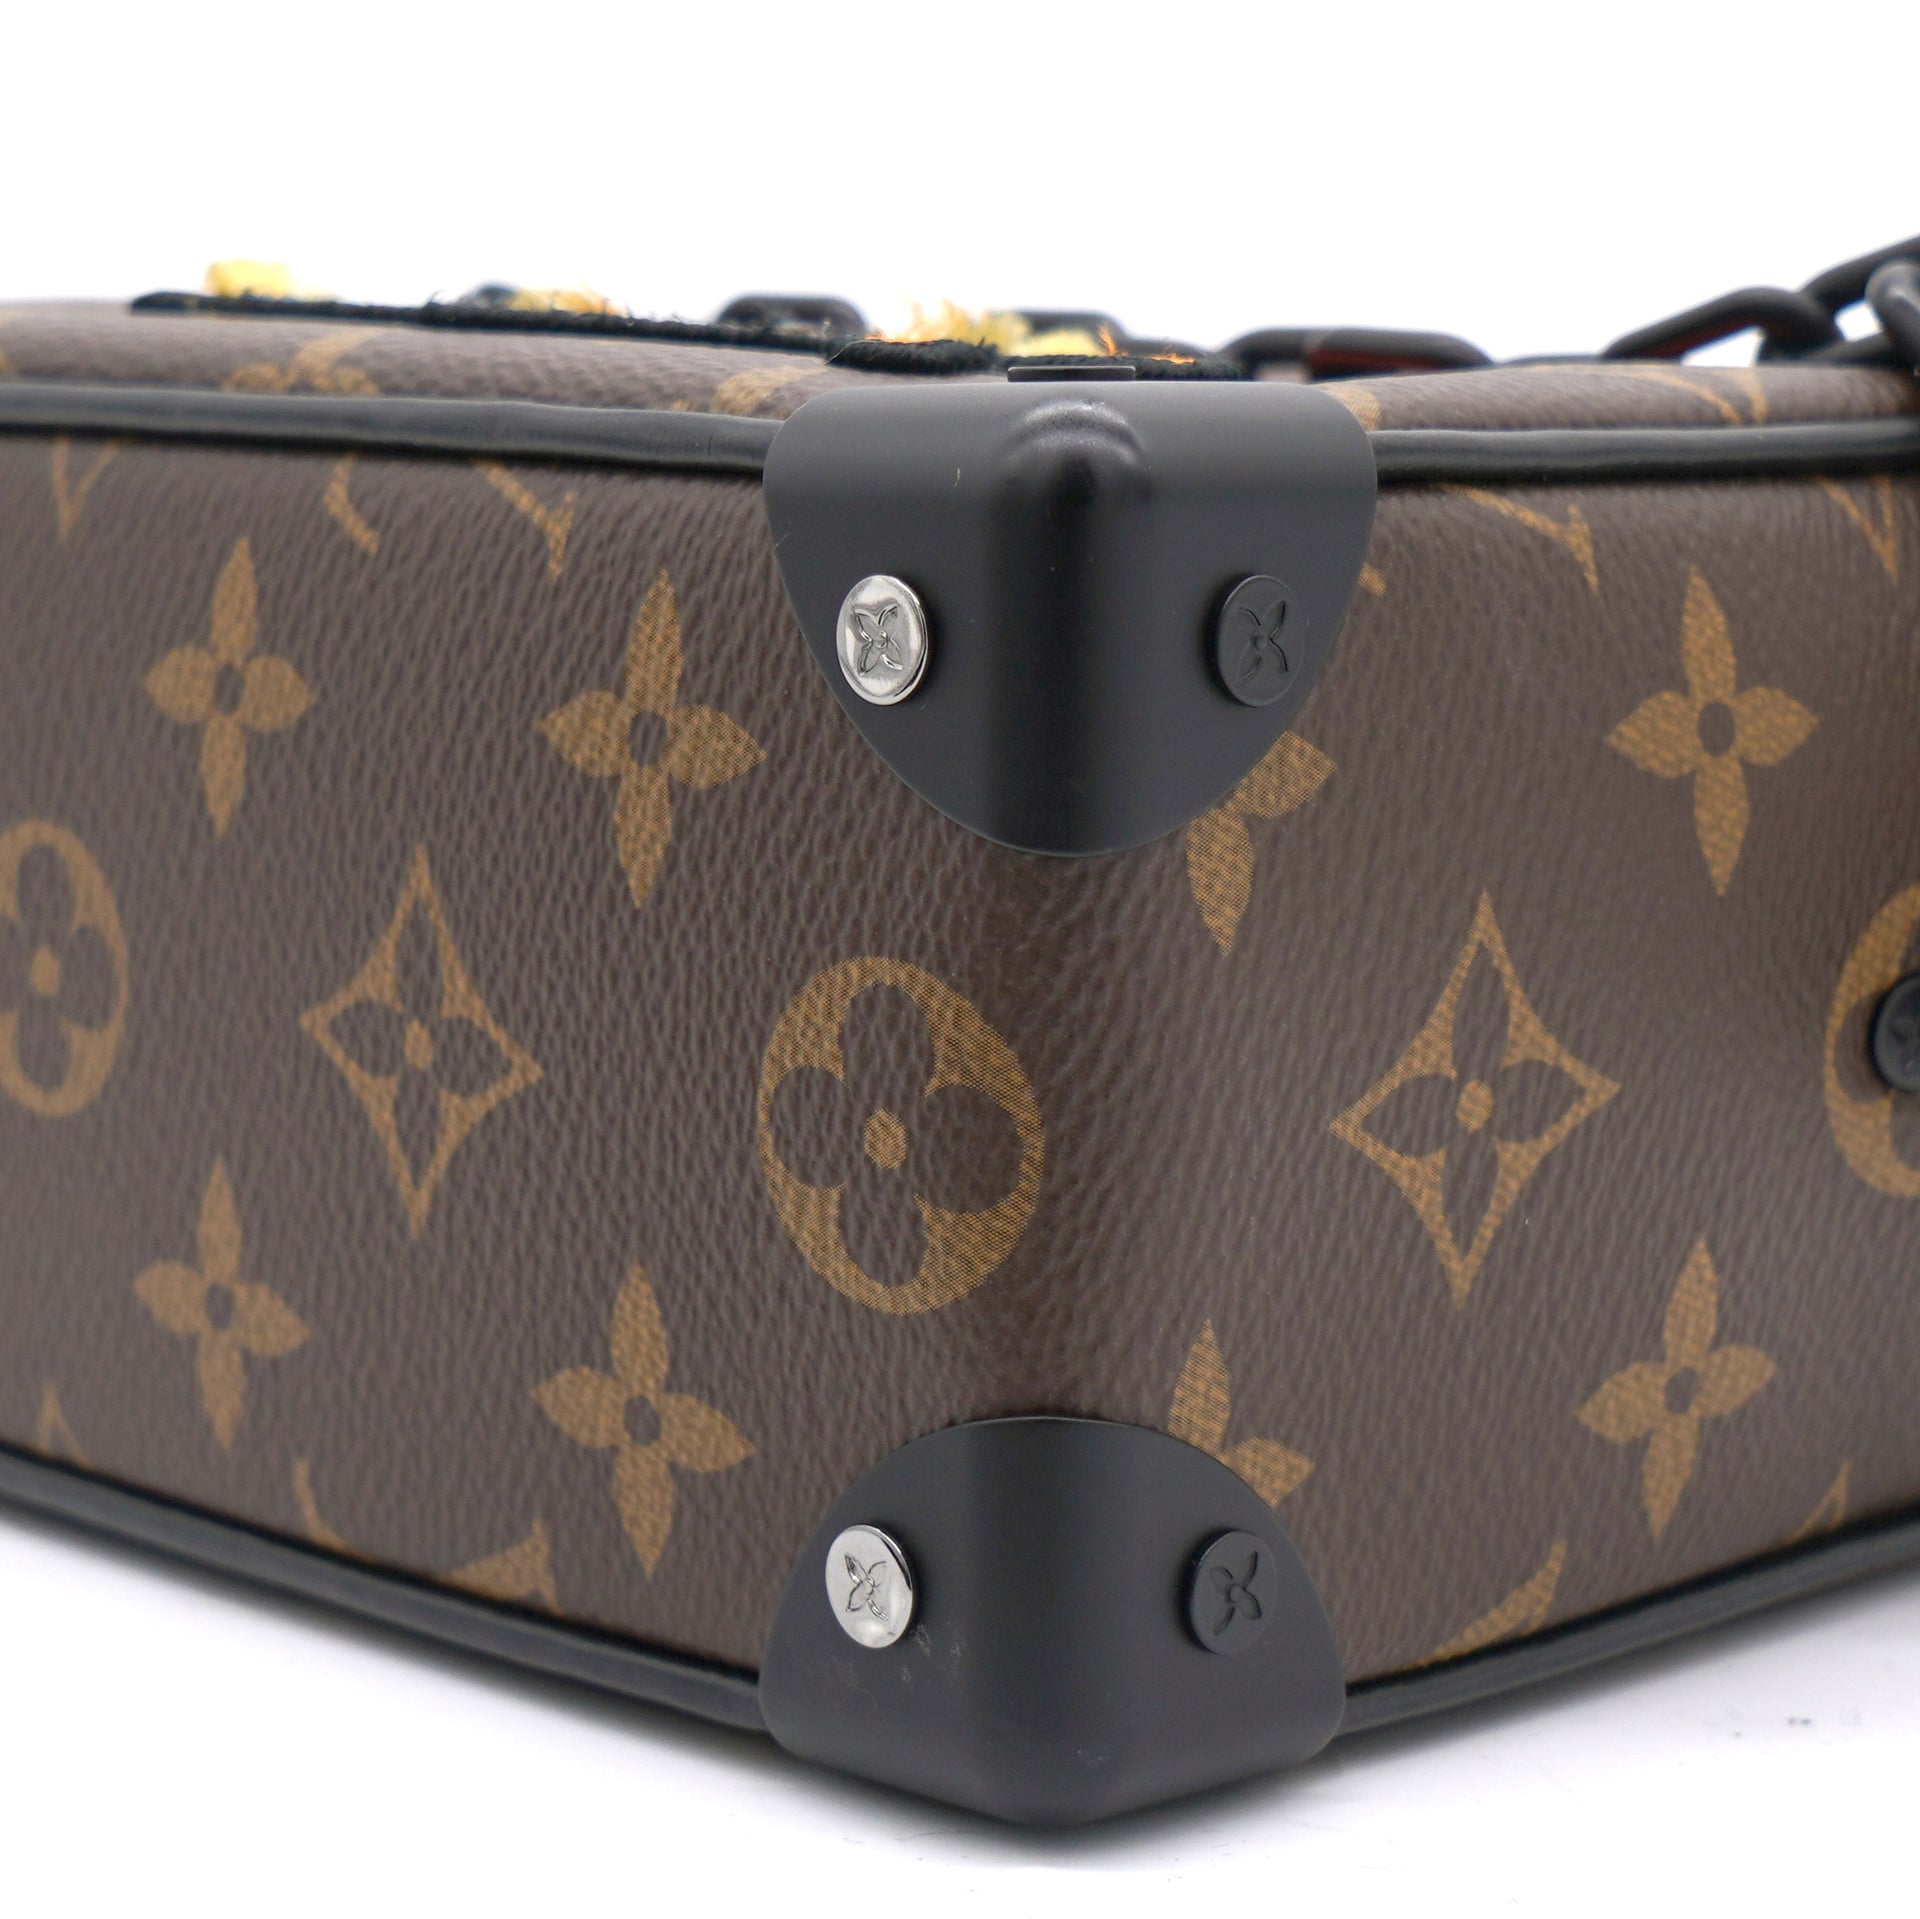 Louis Vuitton Soft Trunk Shoulder Bag in Brown Monogram Canvas and